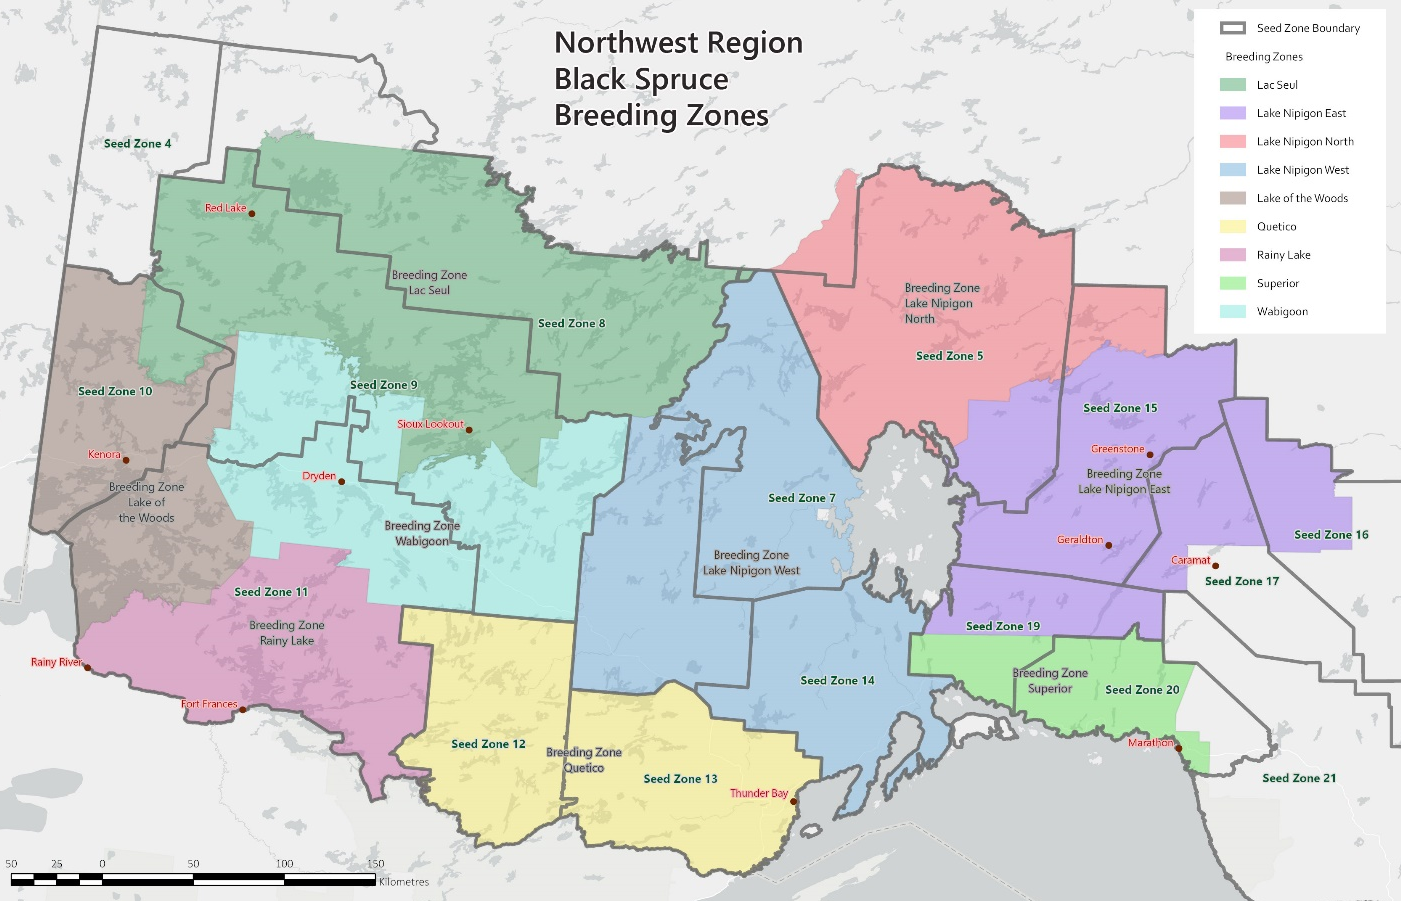 A map of 9 northwestern Ontario region black spruce breeding zones shaded with various colours.